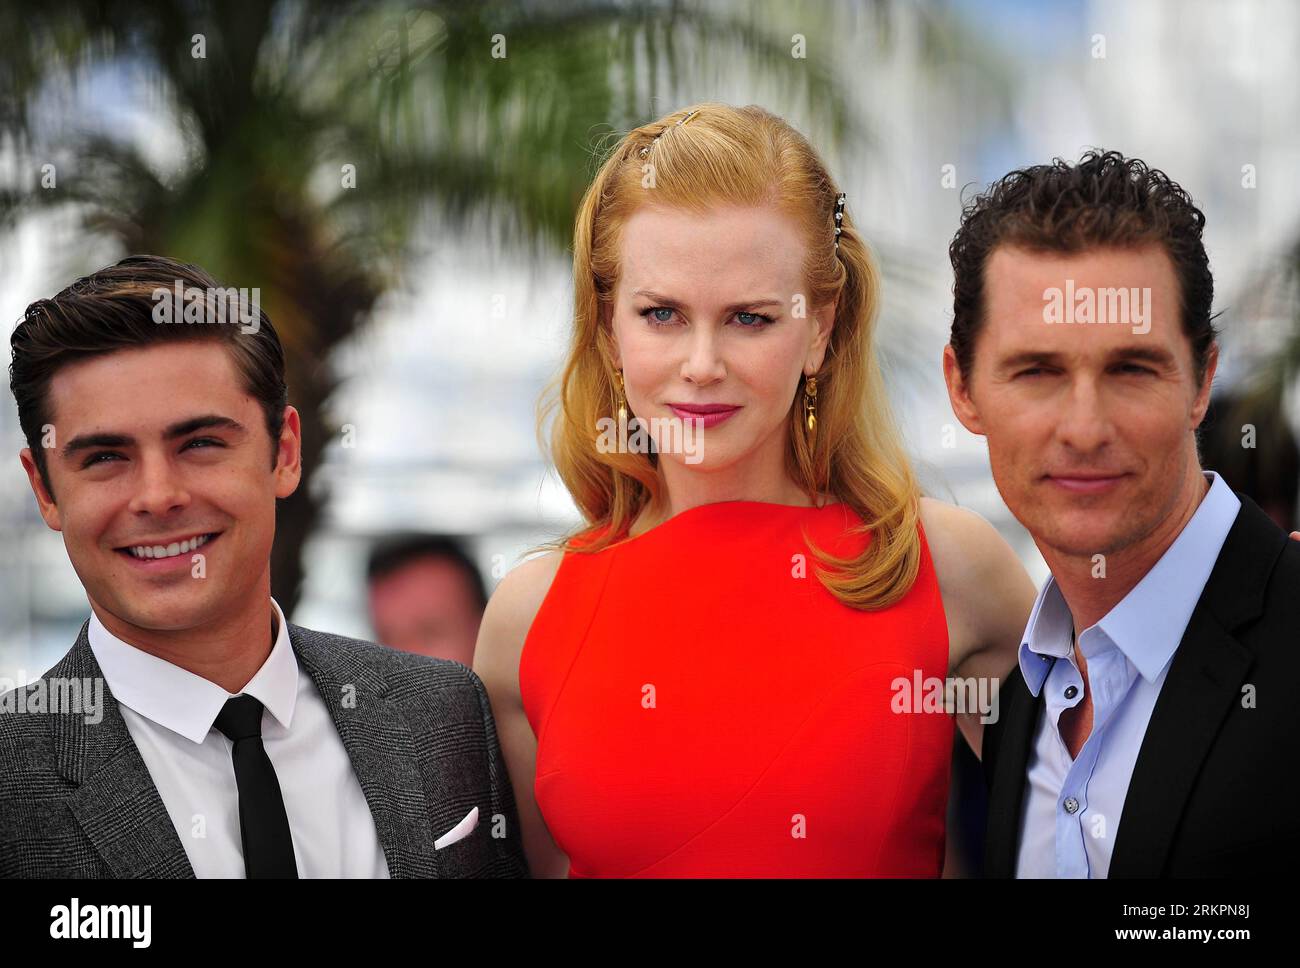 Bildnummer: 58030797  Datum: 24.05.2012  Copyright: imago/Xinhua (120524) -- CANNES, May 24, 2012 (Xinhua) --Cast members actor Zac Efron (L), actress Nicole Kidman (C), actor Matthew Mcconaughey pose for pictures during a photocall for the film The Paperboy by Lee Daniels at the 65th Cannes Film Festival, in Cannes, southern France, May 24, 2012. (Xinhua/Ye Pingfan)(srb) FRANCE-CANNES-FILM FESTIVAL-PHOTOCALL-THE PAPERBOY PUBLICATIONxNOTxINxCHN Kultur Entertainment People Film 65. Internationale Filmfestspiele Cannes x0x xkg 2012 quer      58030797 Date 24 05 2012 Copyright Imago XINHUA  Canne Stock Photo